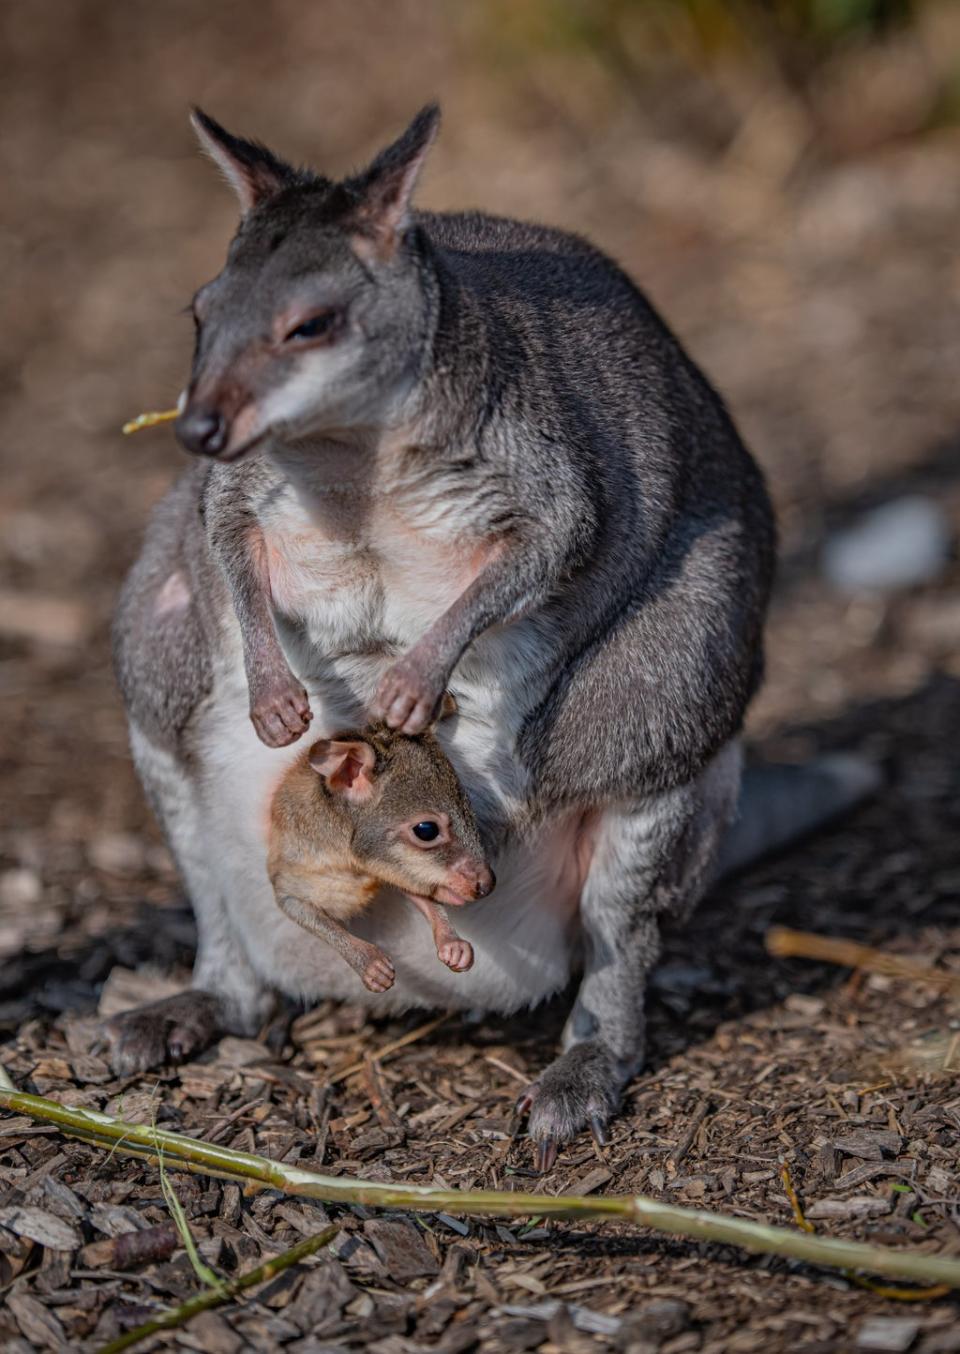 A newborn dusky pademelon joey peeks out of mum’s pouch for the first time at Chester Zoo. (Chester Zoo/PA)